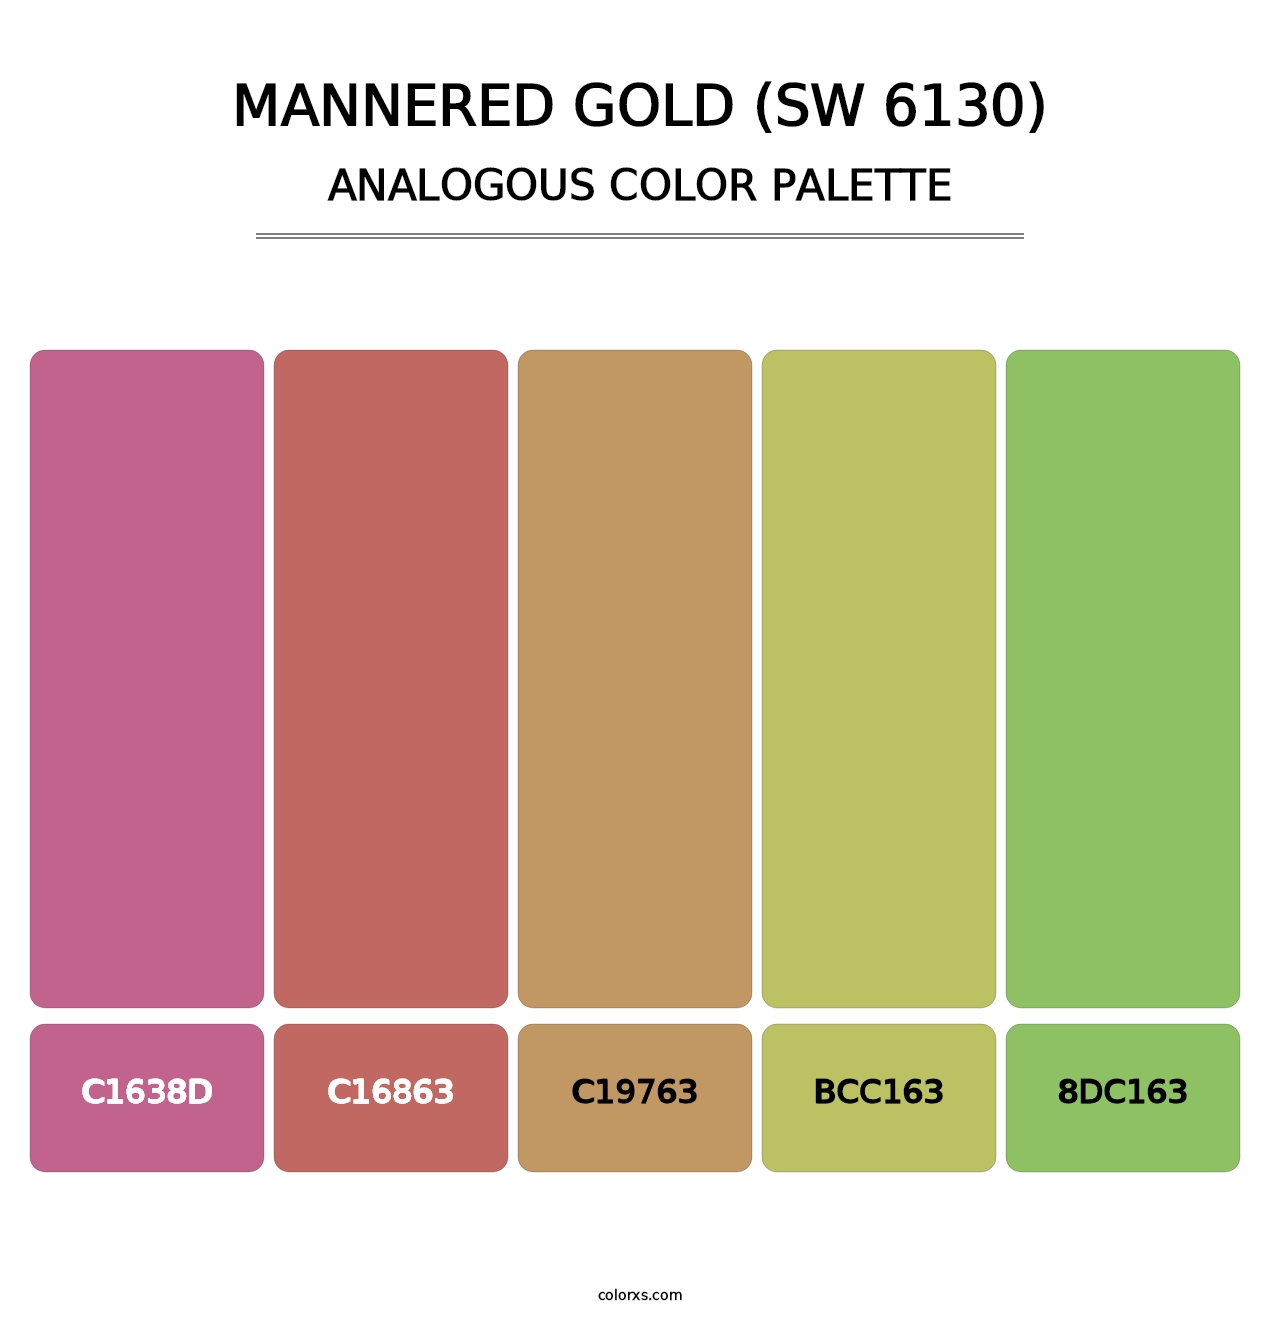 Mannered Gold (SW 6130) - Analogous Color Palette